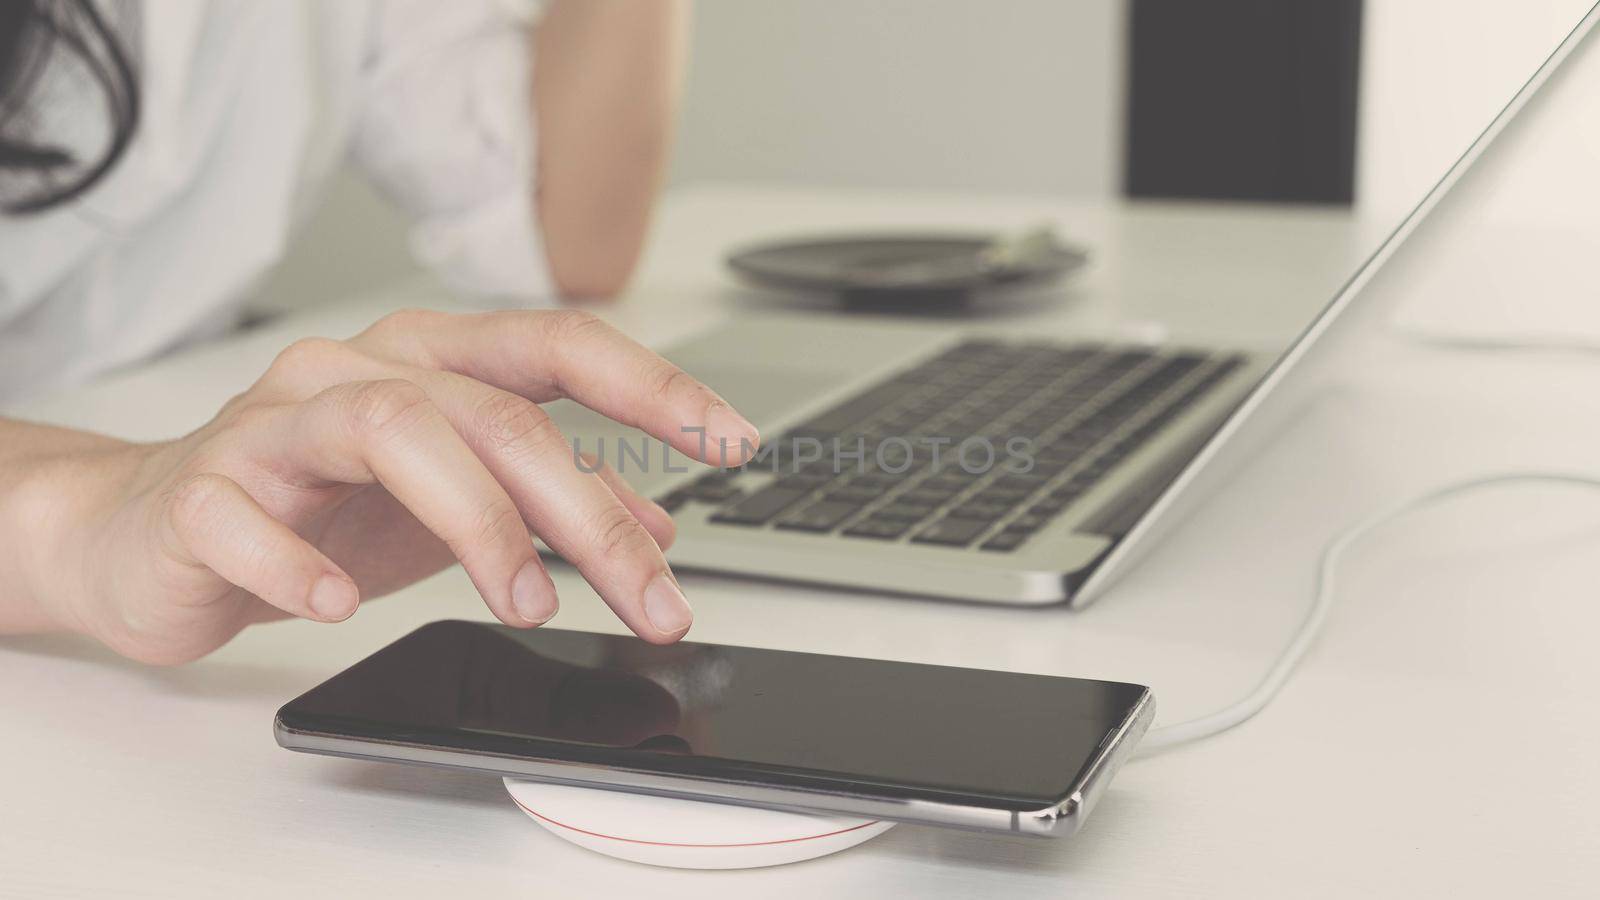 Business Woman working on workplace and mobile phone charging with wireless device
